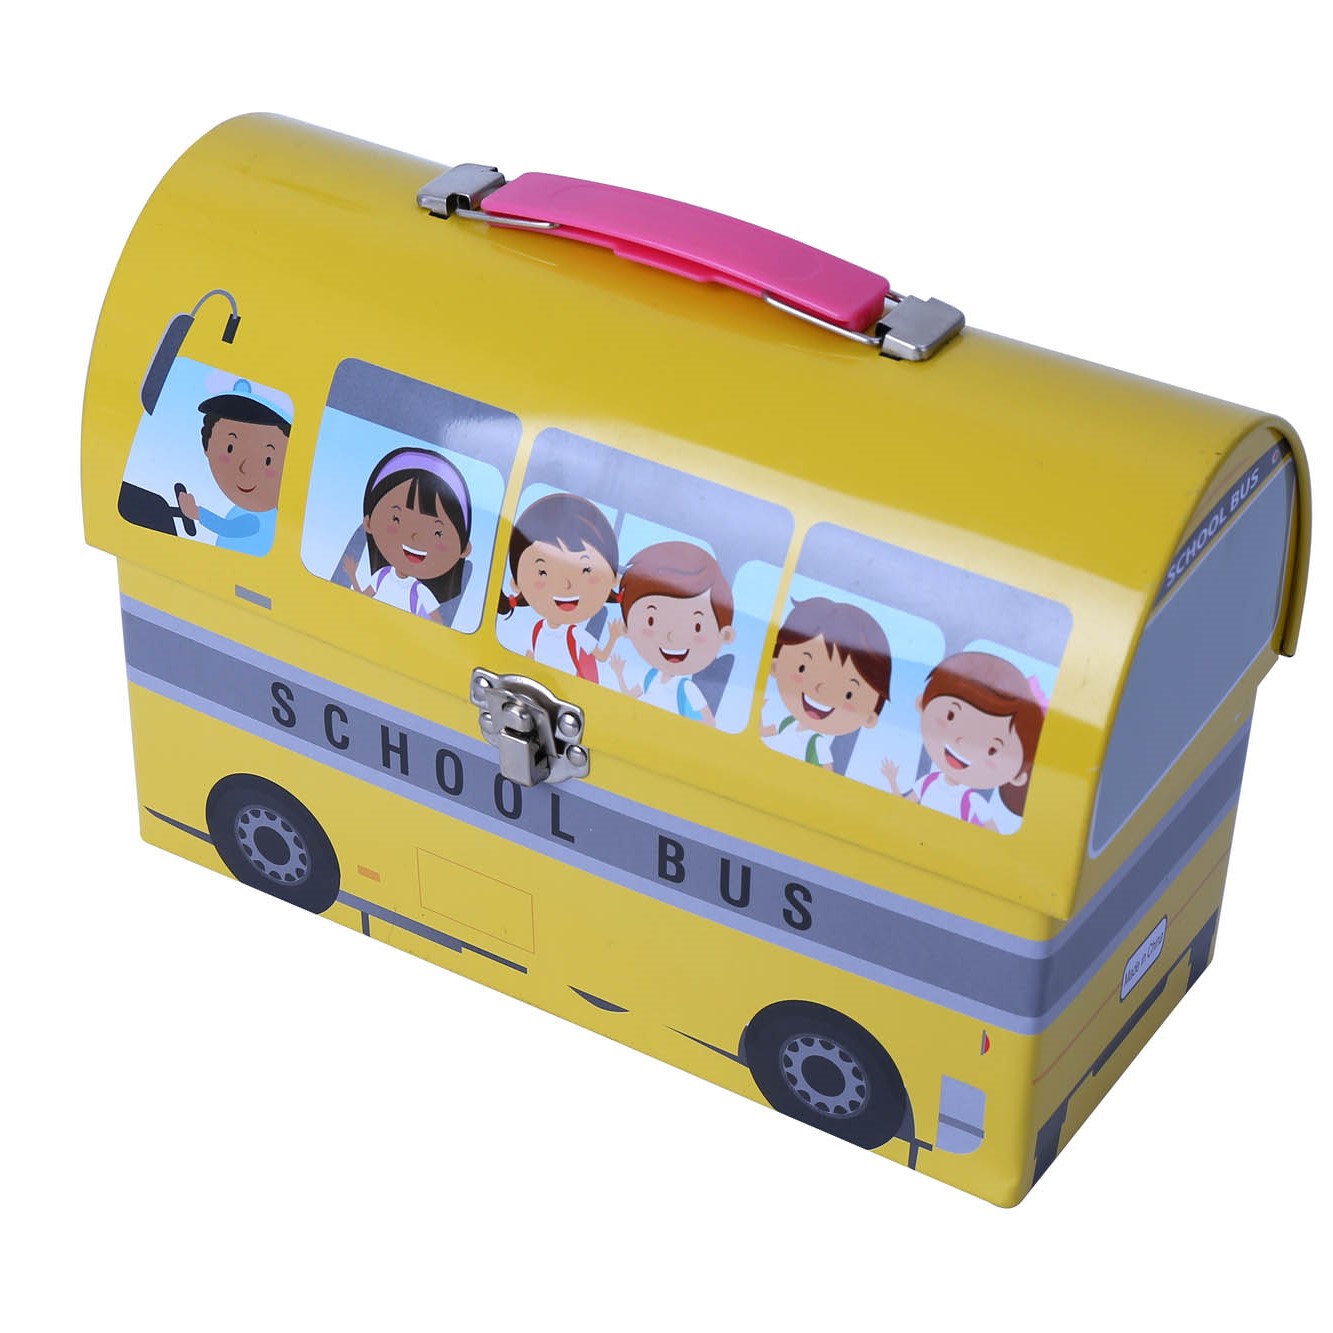 School bus shape kids lunch box with handle